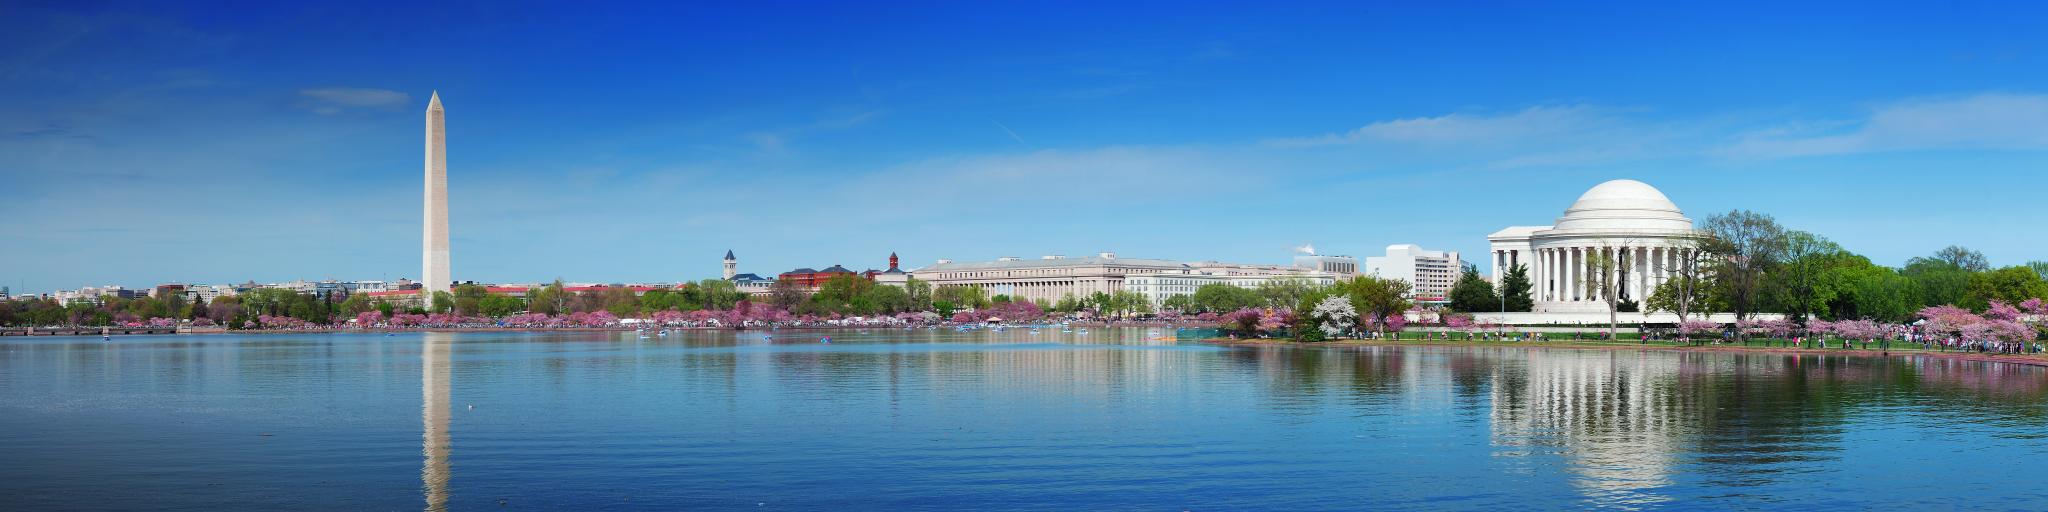 A panorama of the Washington Monument and Thomas Jefferson Memorial, Washington DC with cherry blossoms reflecting the water.